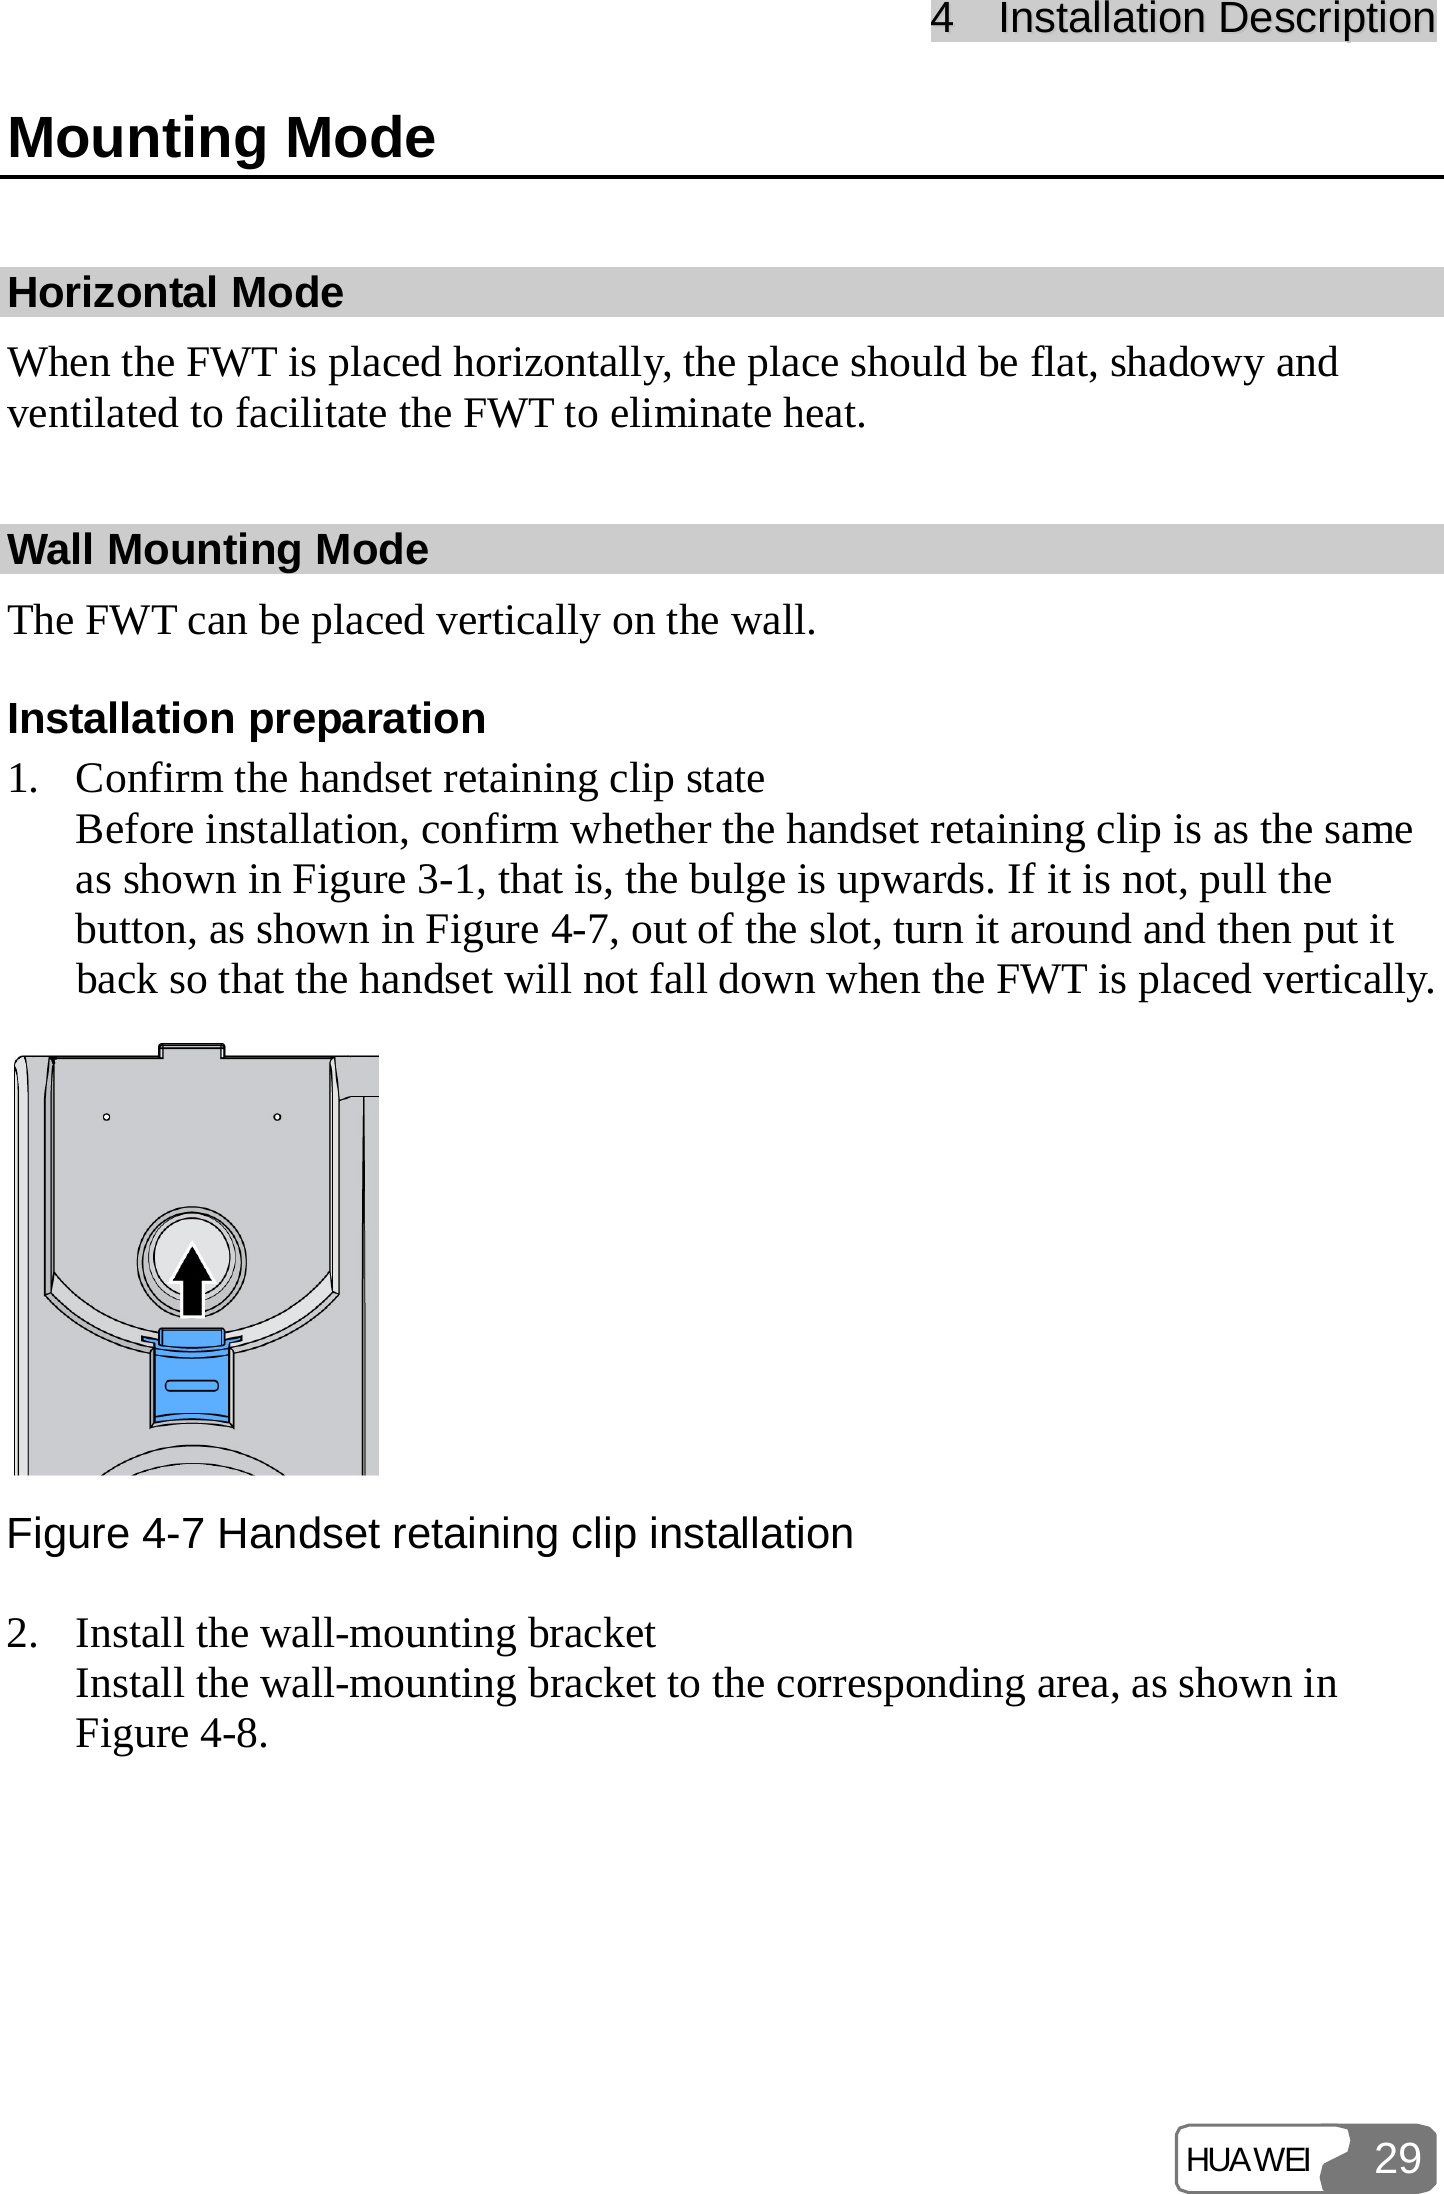 44    IInnssttaallllaattiioonn  DDeessccrriippttiioonn  HUAWEI 29Mounting Mode Horizontal Mode When the FWT is placed horizontally, the place should be flat, shadowy and ventilated to facilitate the FWT to eliminate heat. Wall Mounting Mode The FWT can be placed vertically on the wall. Installation preparation 1. Confirm the handset retaining clip state Before installation, confirm whether the handset retaining clip is as the same as shown in Figure 3-1, that is, the bulge is upwards. If it is not, pull the button, as shown in Figure 4-7, out of the slot, turn it around and then put it back so that the handset will not fall down when the FWT is placed vertically.  Figure 4-7 Handset retaining clip installation 2. Install the wall-mounting bracket Install the wall-mounting bracket to the corresponding area, as shown in Figure 4-8. 